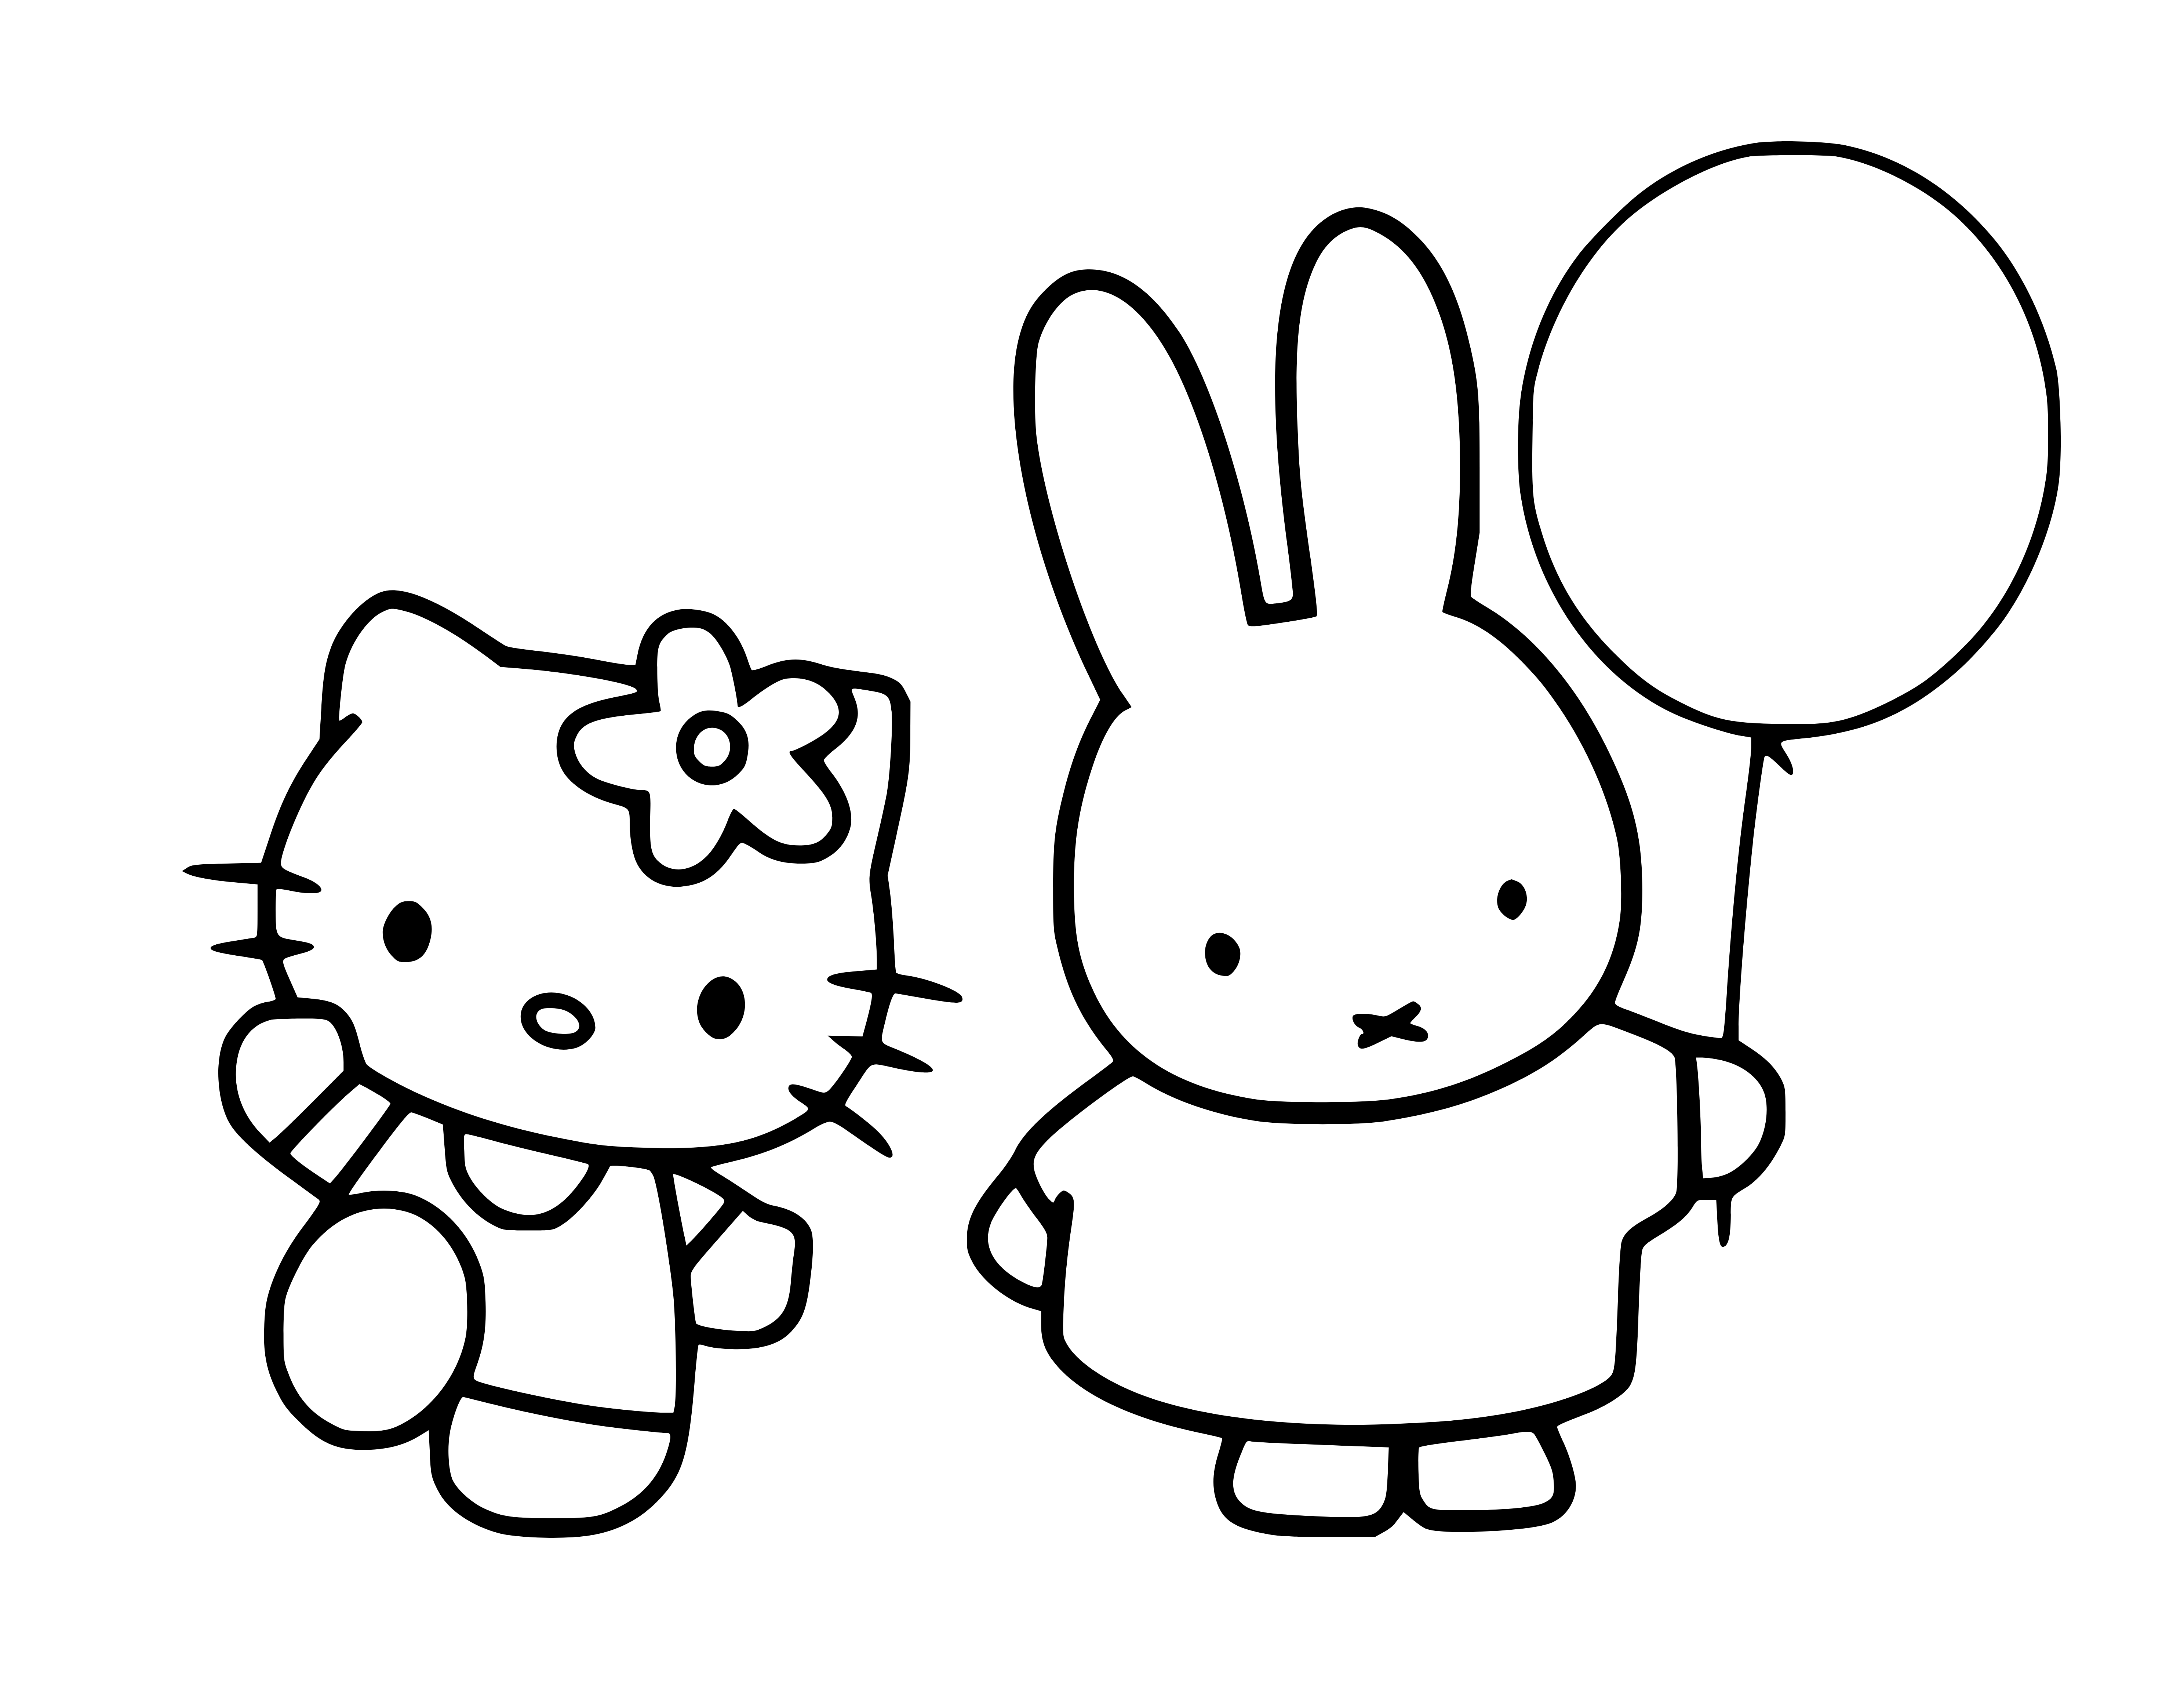 Printable Hello Kitty's Bunny Friend Coloring Page for kids.